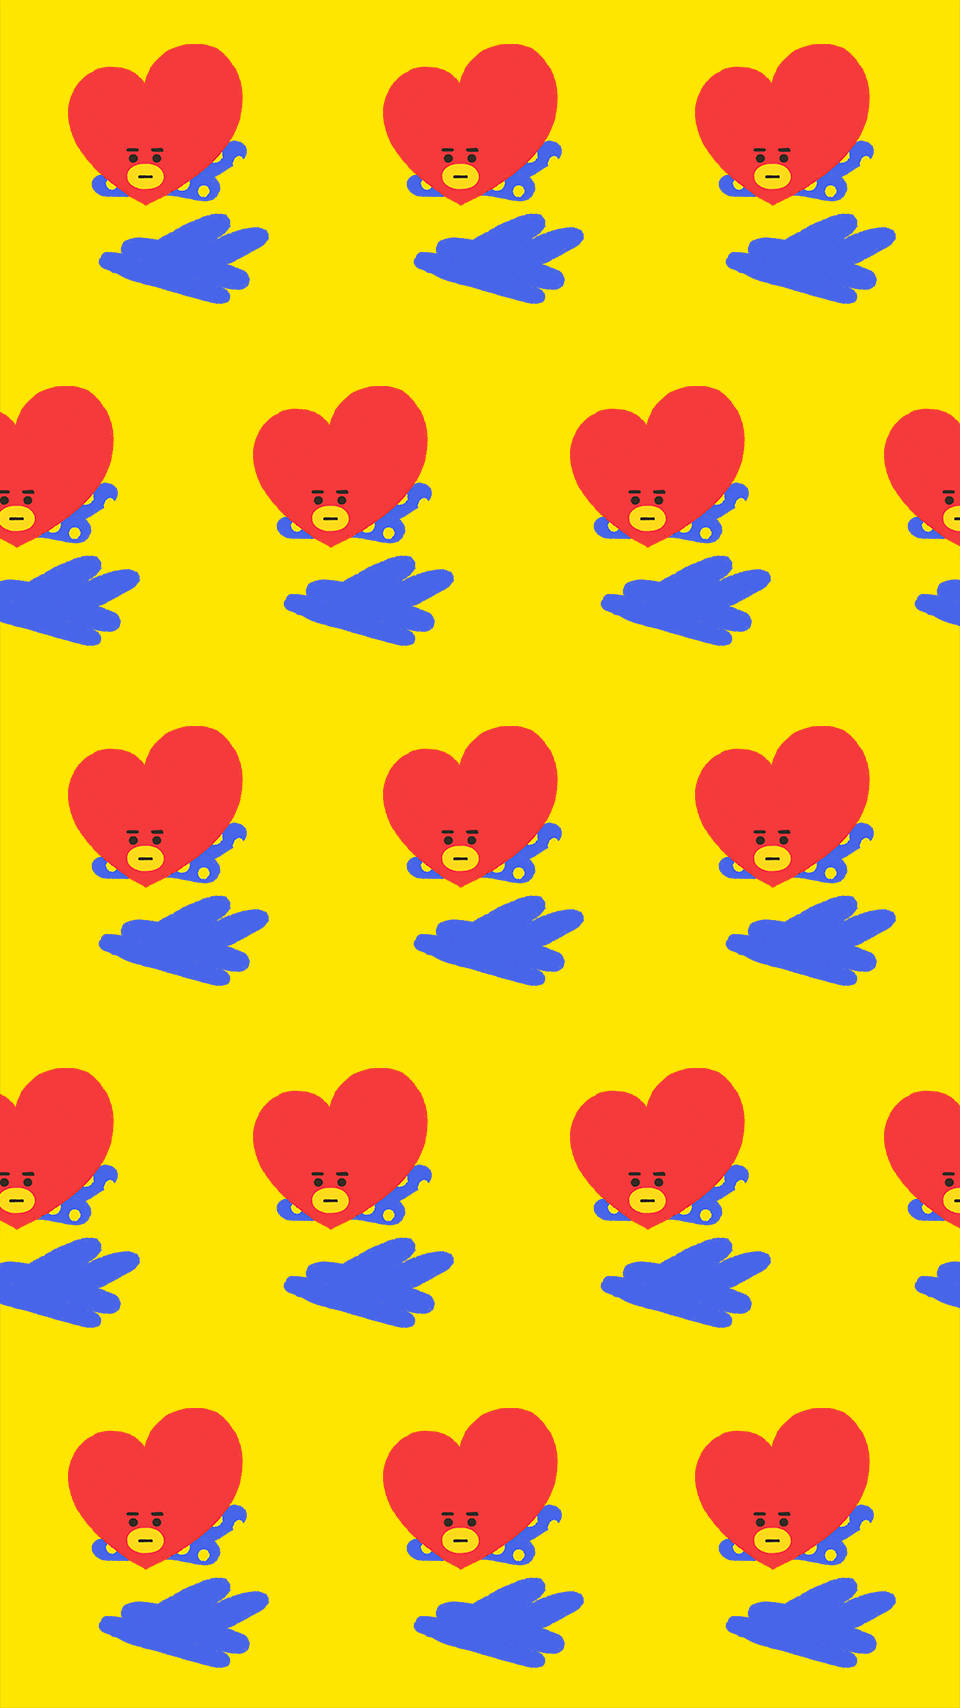 Brighten Up Your Day With Bt21's Cute And Cheerful Tata Pattern In Yellow!